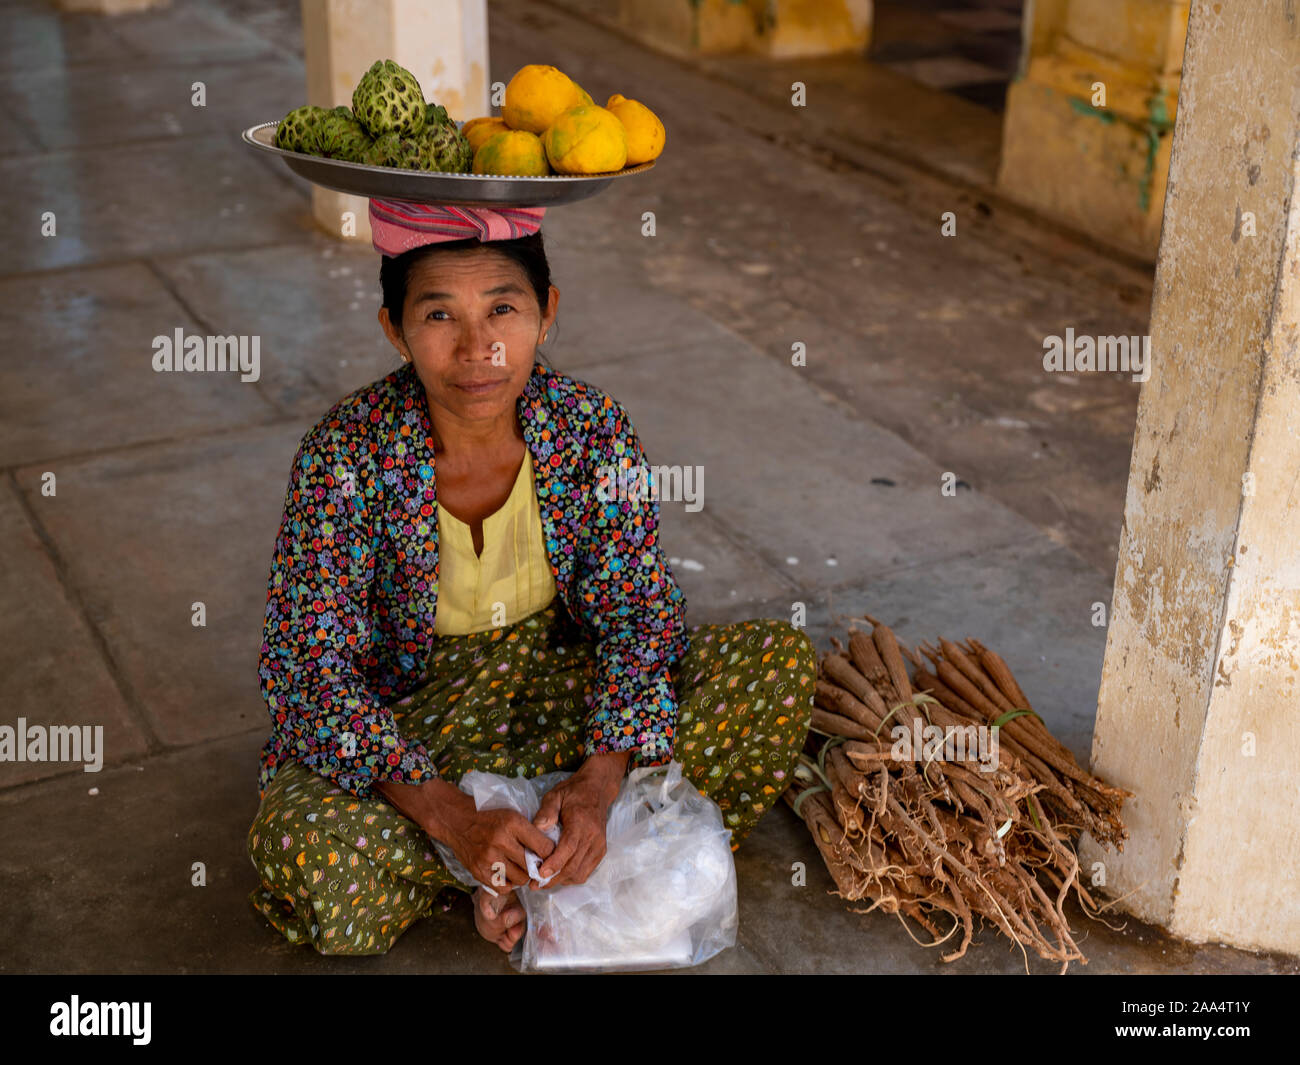 Burmese woman selling custard apples and oranges which she balances on a tray on her head in a temple of Bagan, Myanmar (Burma) Stock Photo